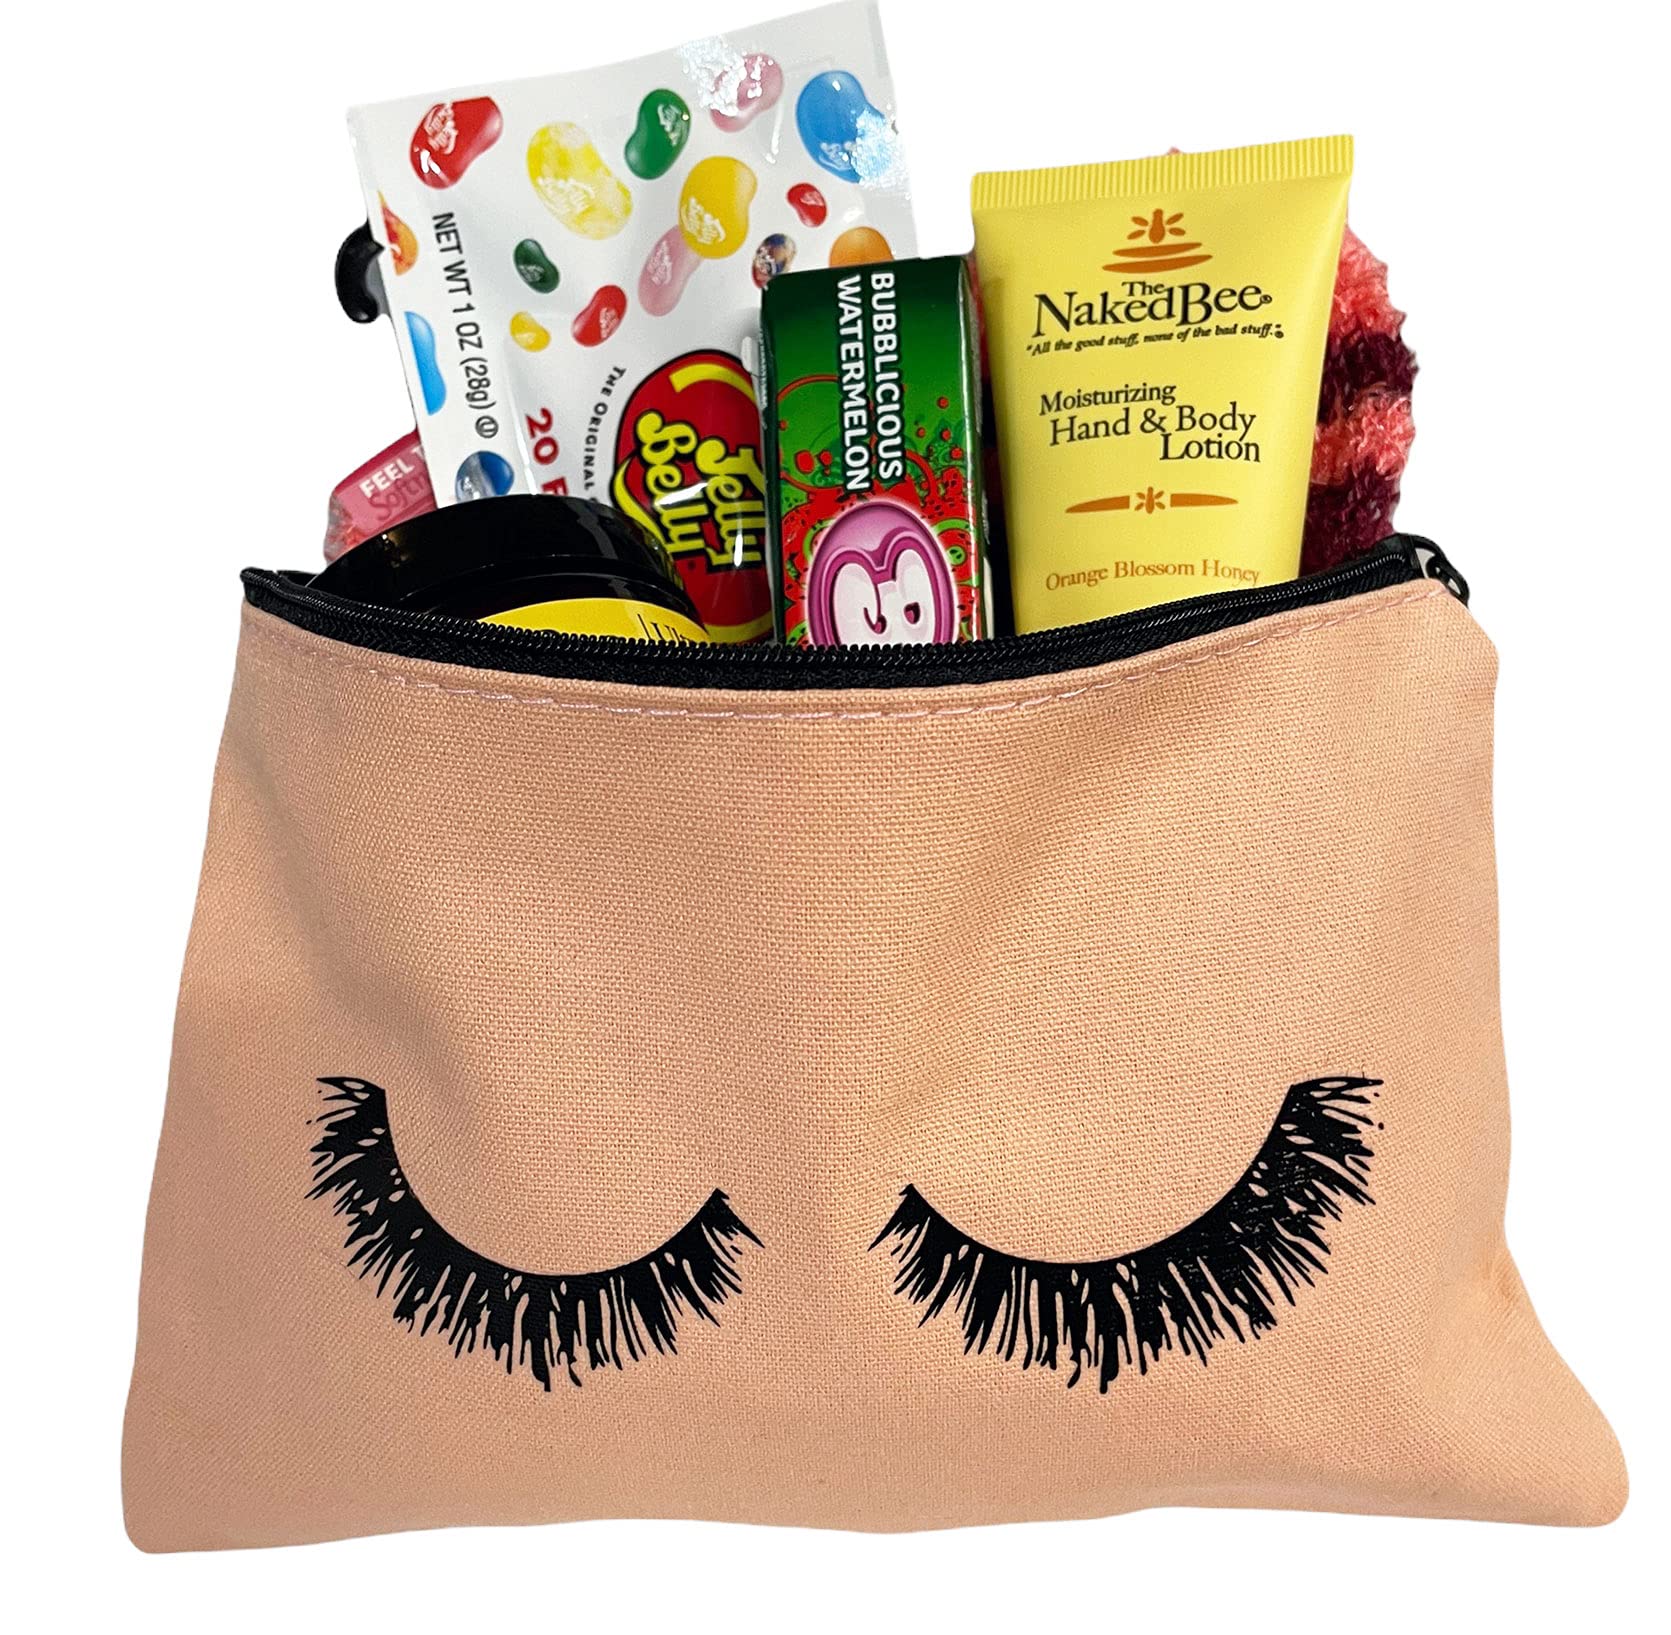 Valentine Gift Set - 7 pc Valentine Gifts For Teens, Women, Valentine Gifts for Girls, Includes Bath & Body Products, Fuzzy Socks, gum and is tucked inside a cute cosmetic case